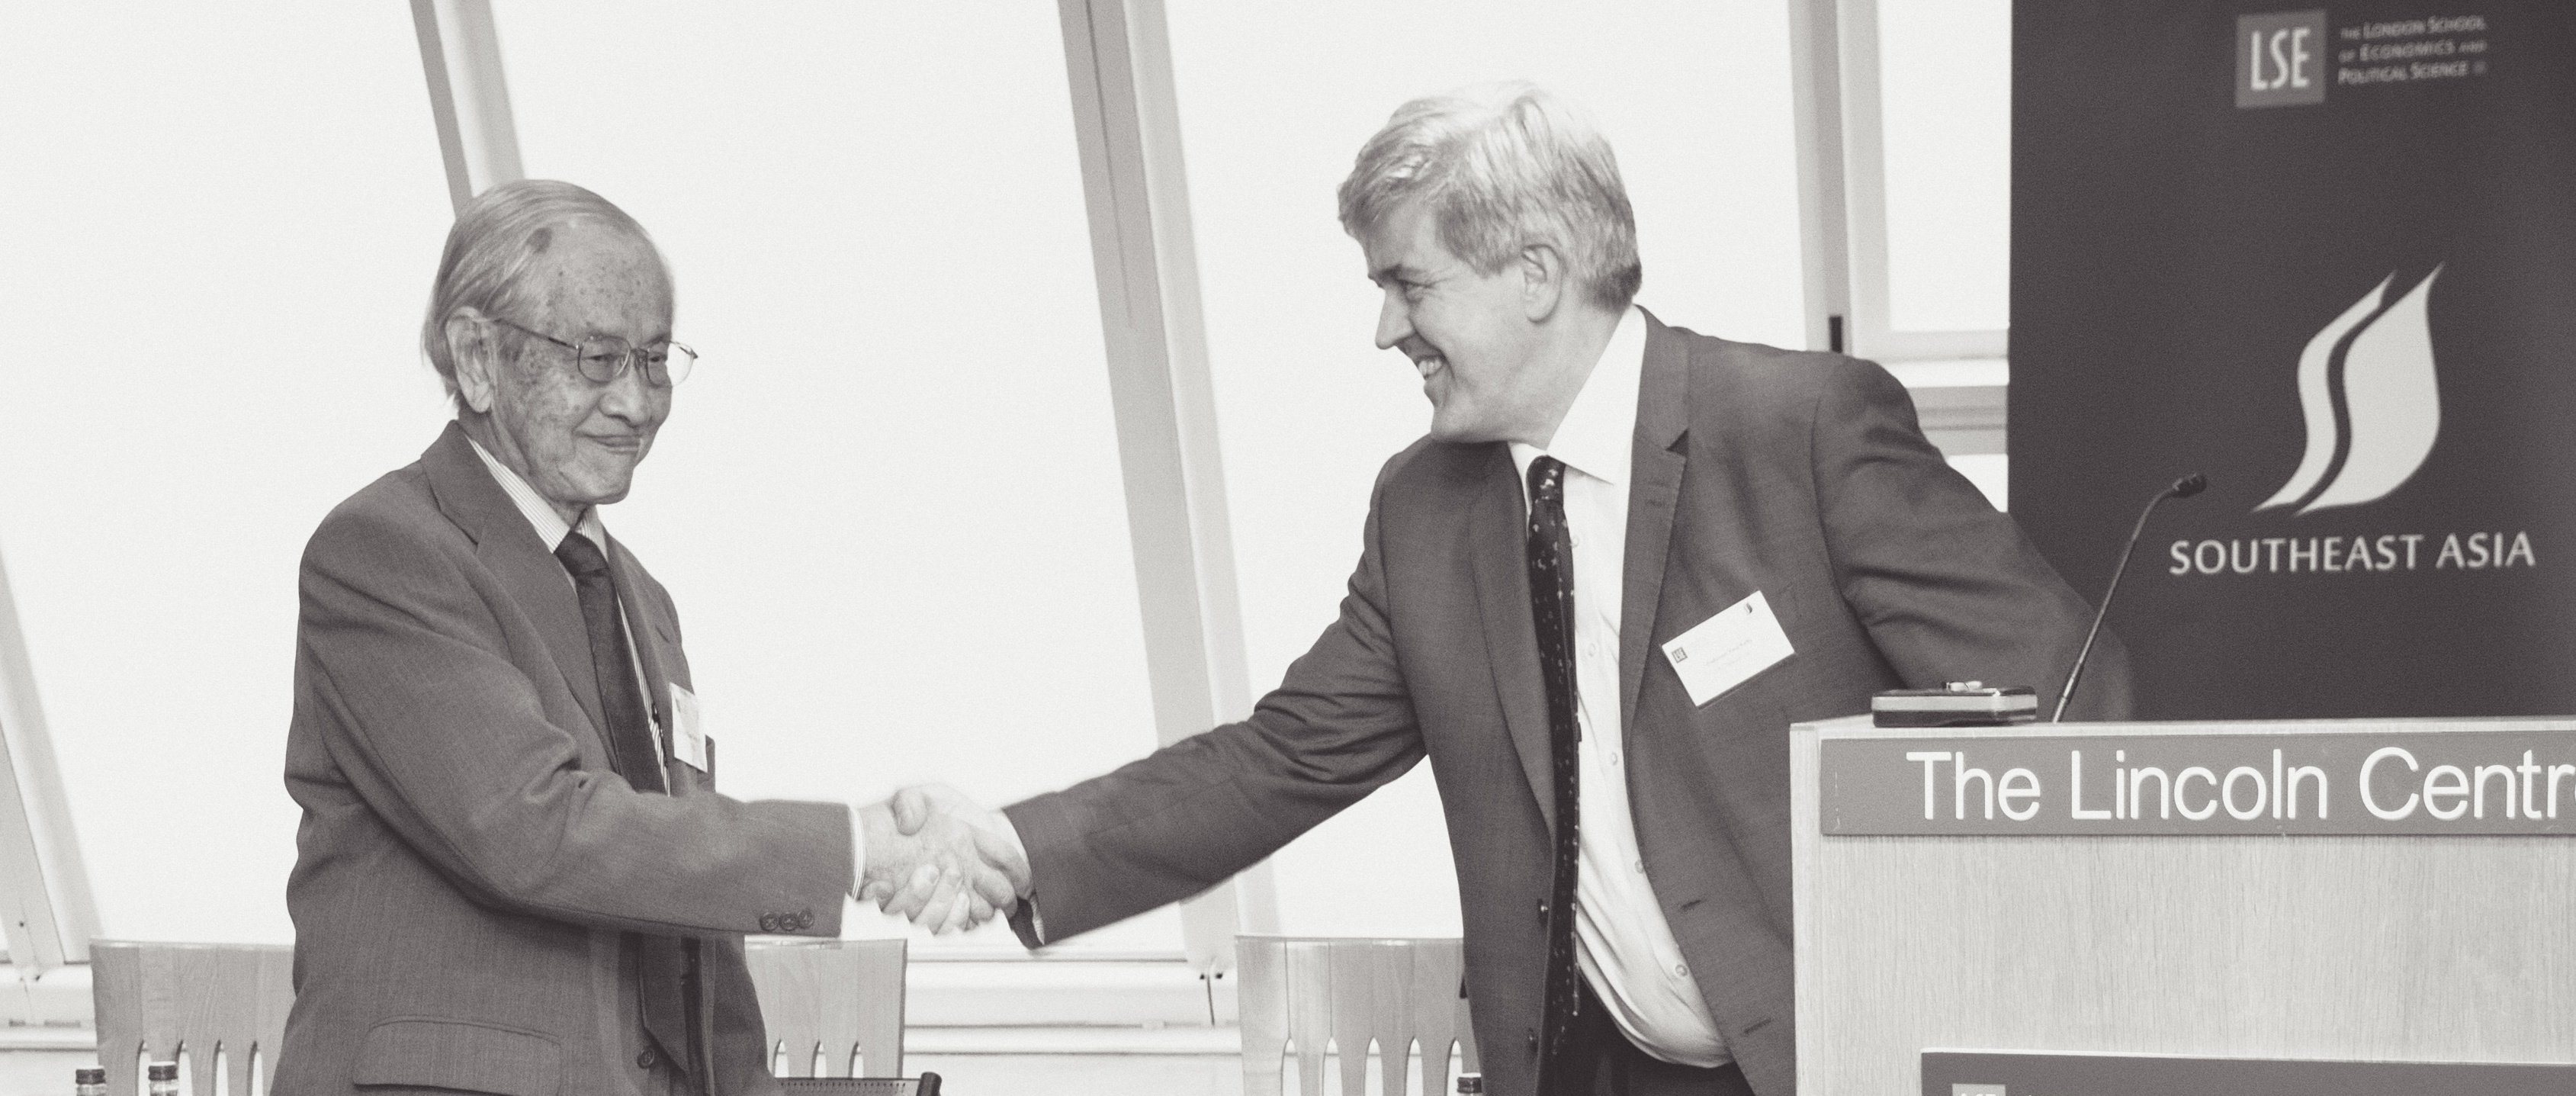 Professor Saw Swee Hock and LSE's Pro-Director shaking hands